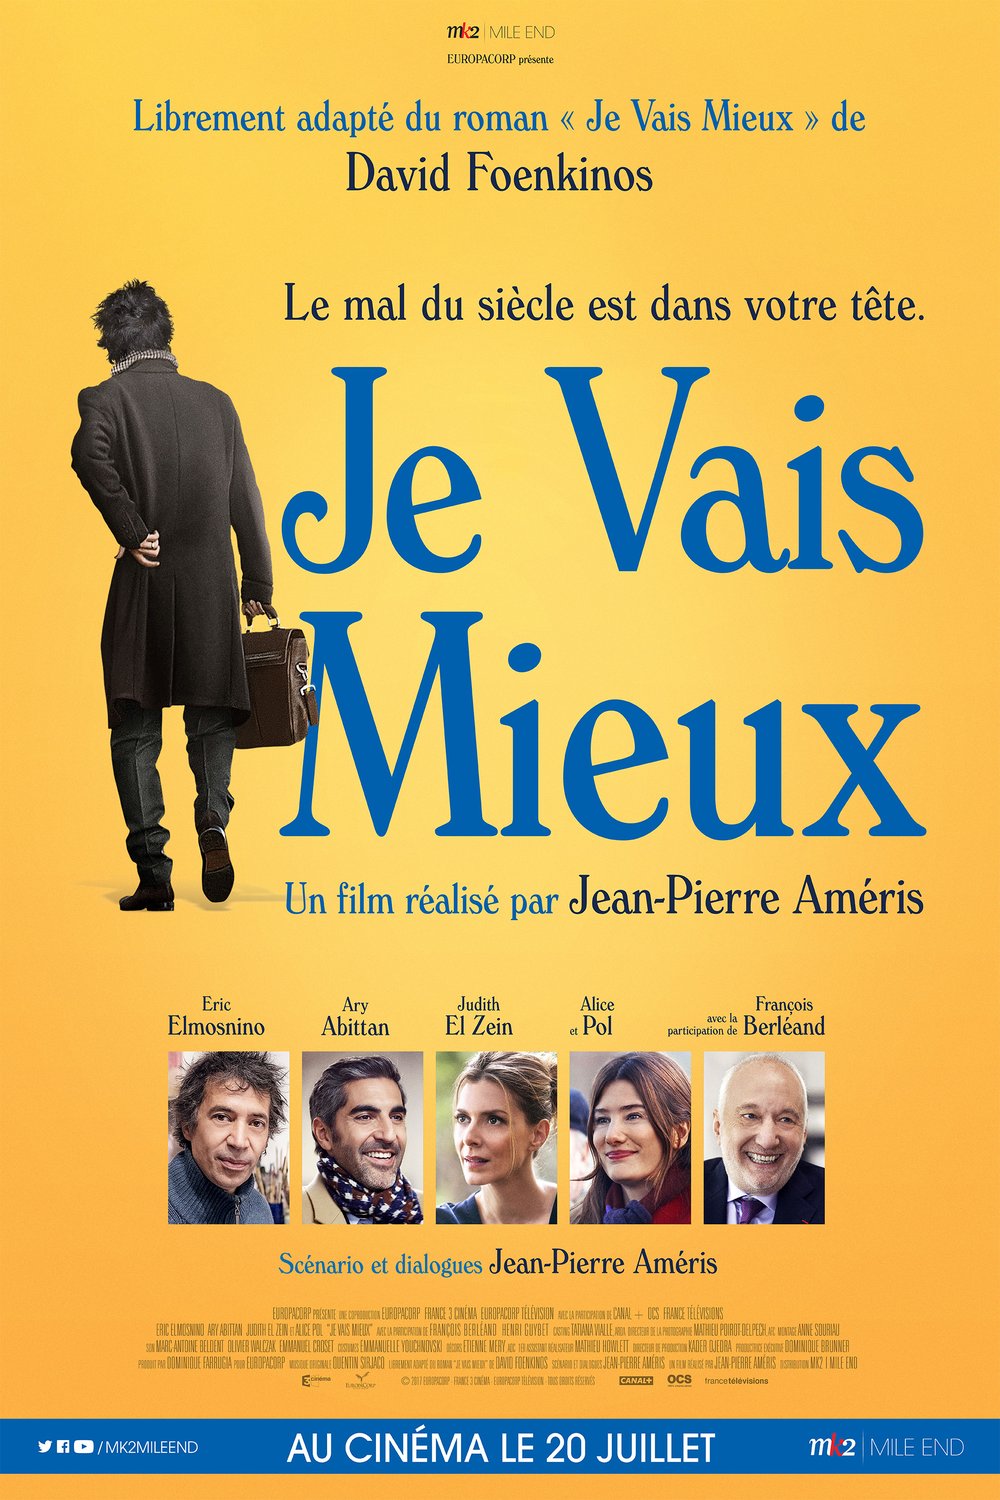 Poster of the movie Je vais mieux